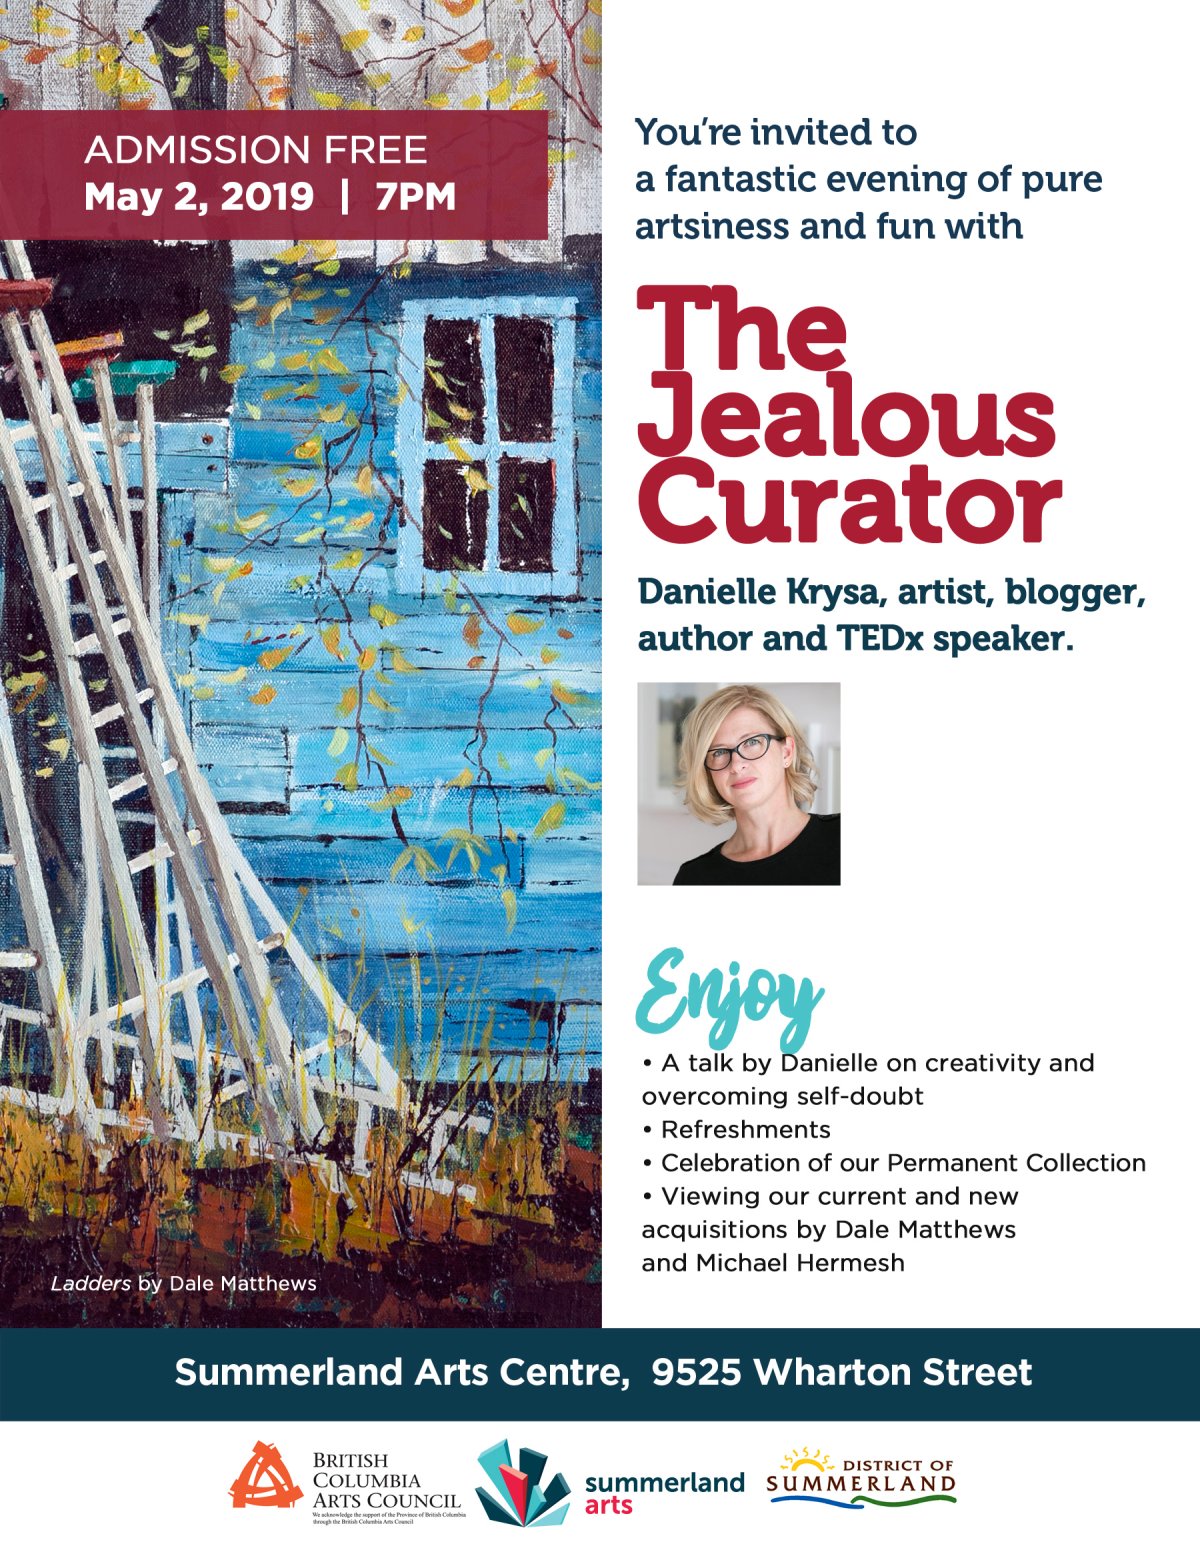 An Arts Evening with The Jealous Curator - image